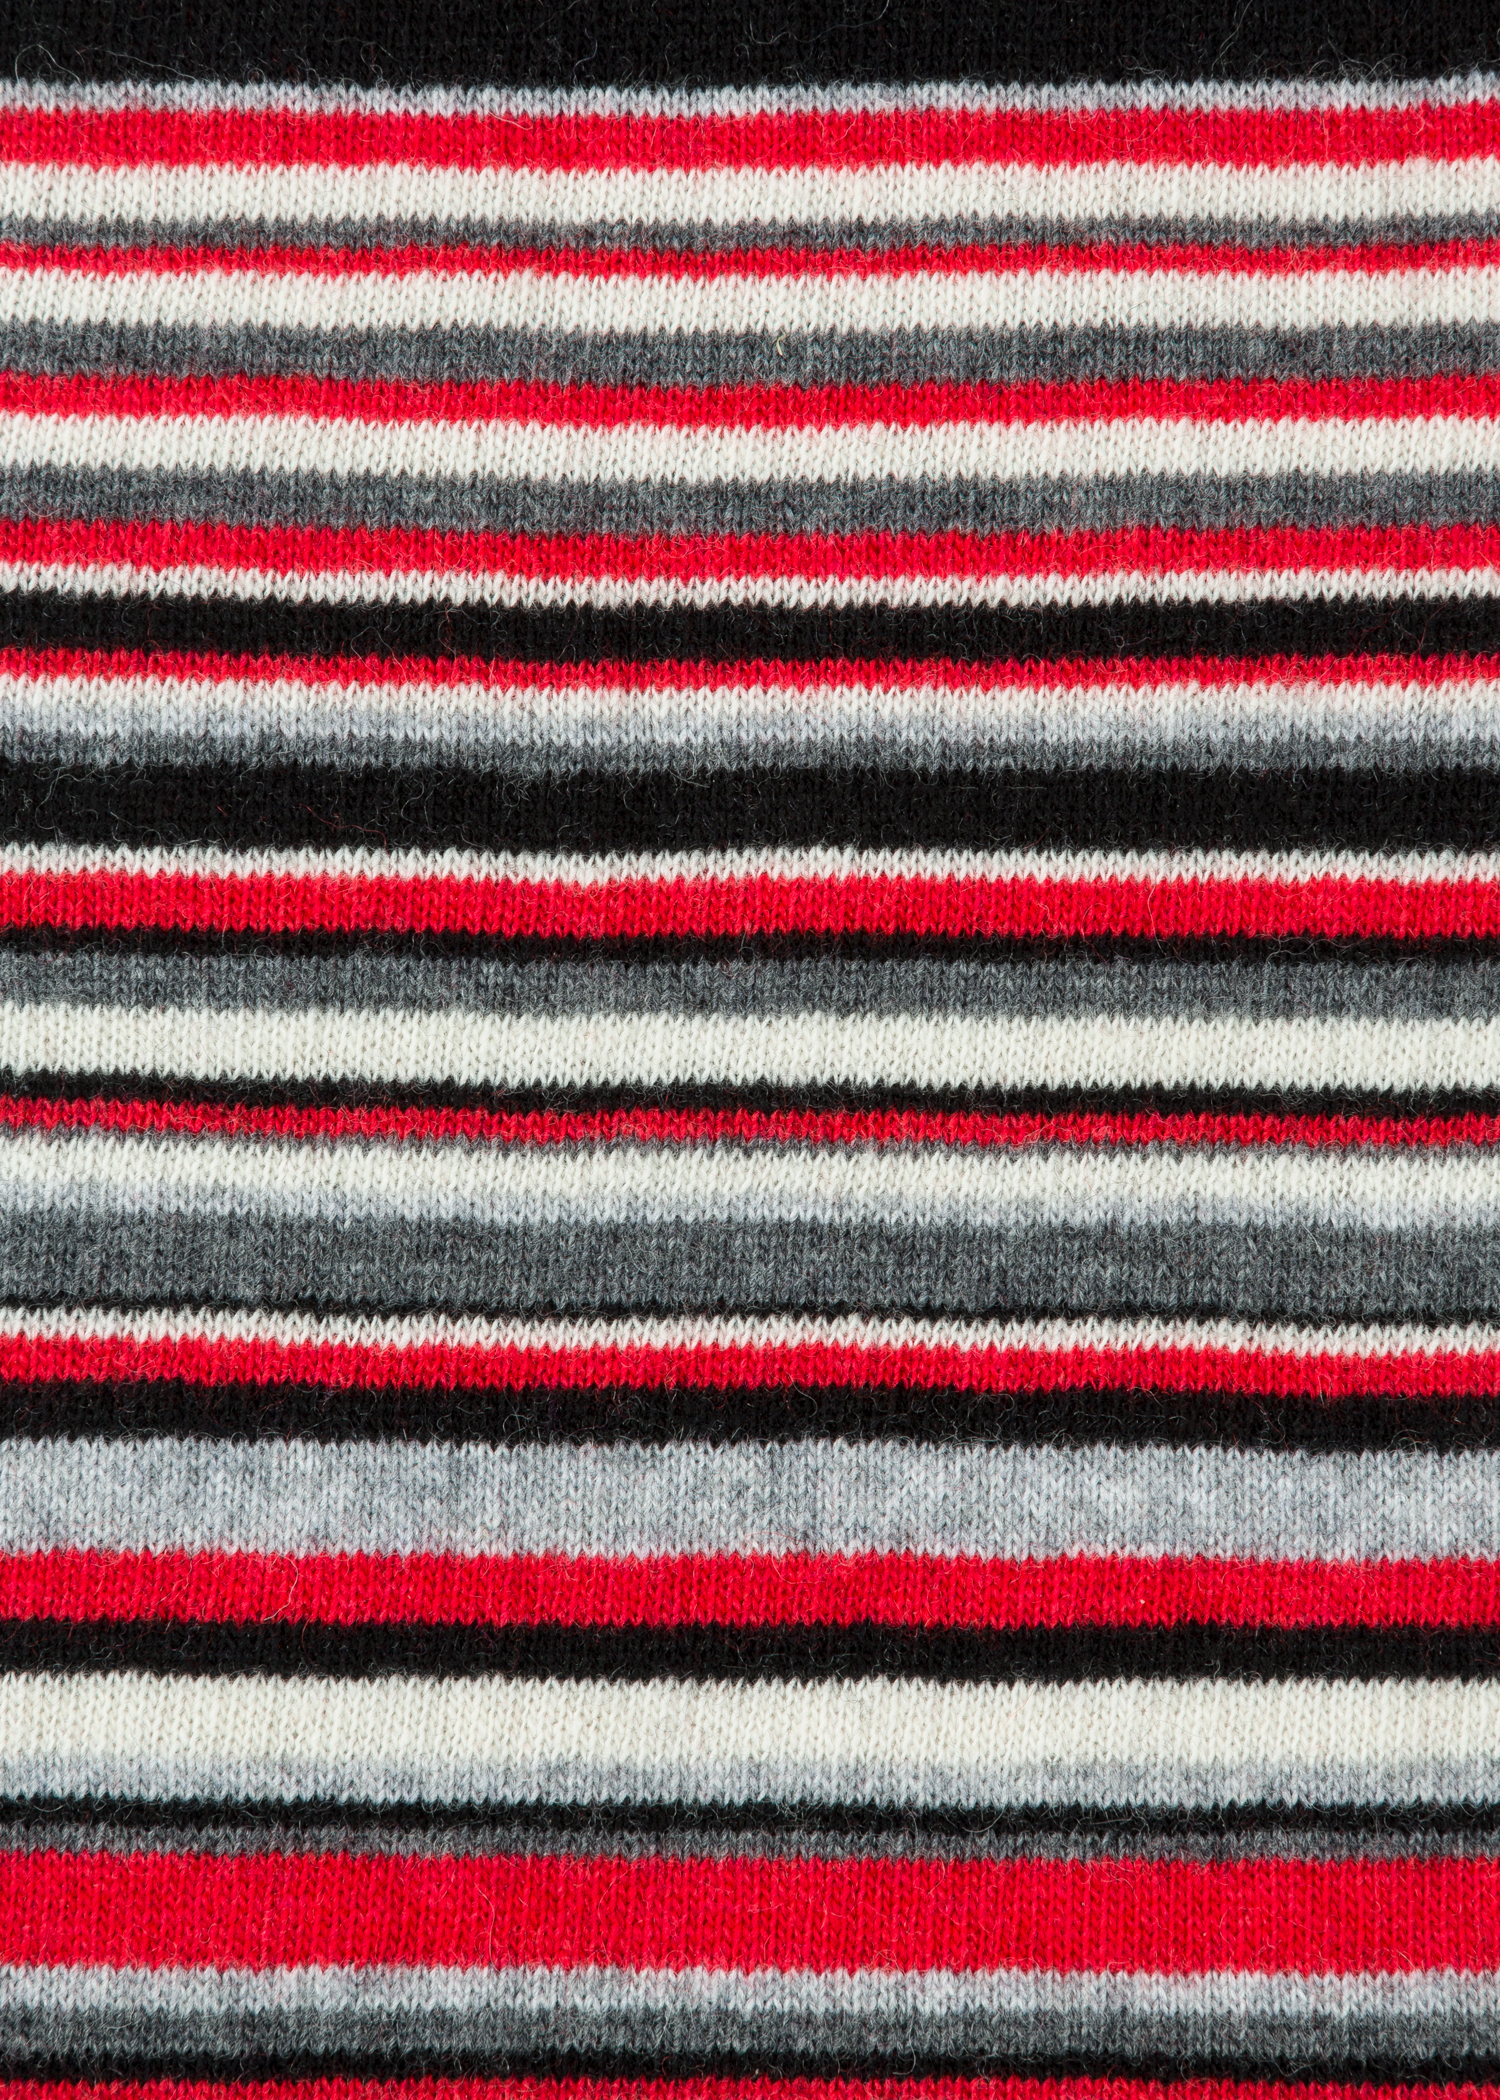 Fabric swatch - Paul Smith & Manchester United – Red Striped Wool-Cashmere Scarf Paul Smith